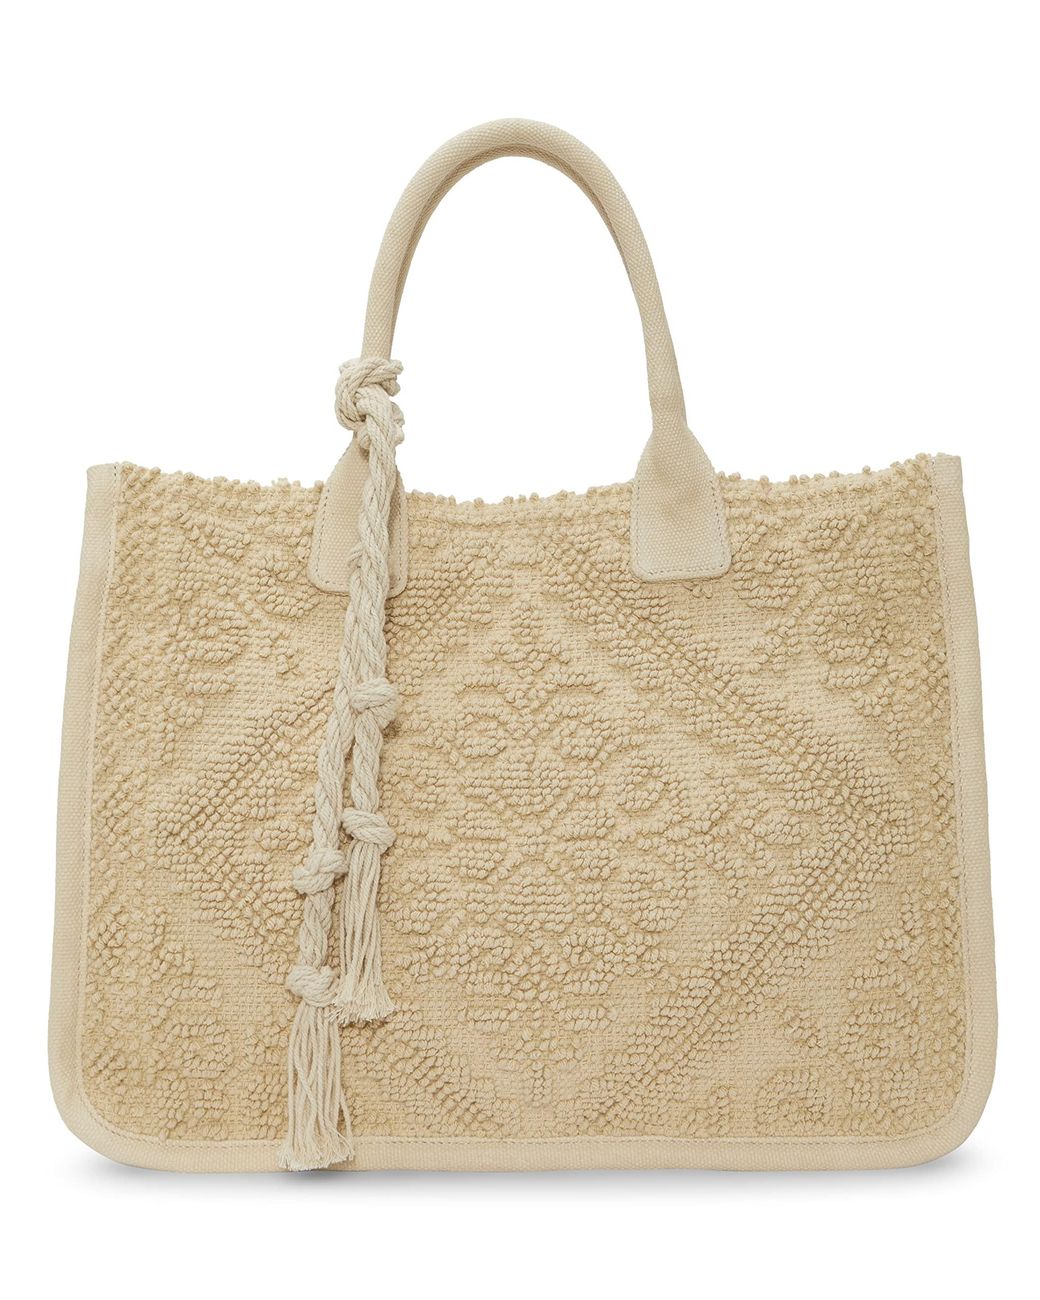 Vince Camuto Orla Tote in Natural | Lyst